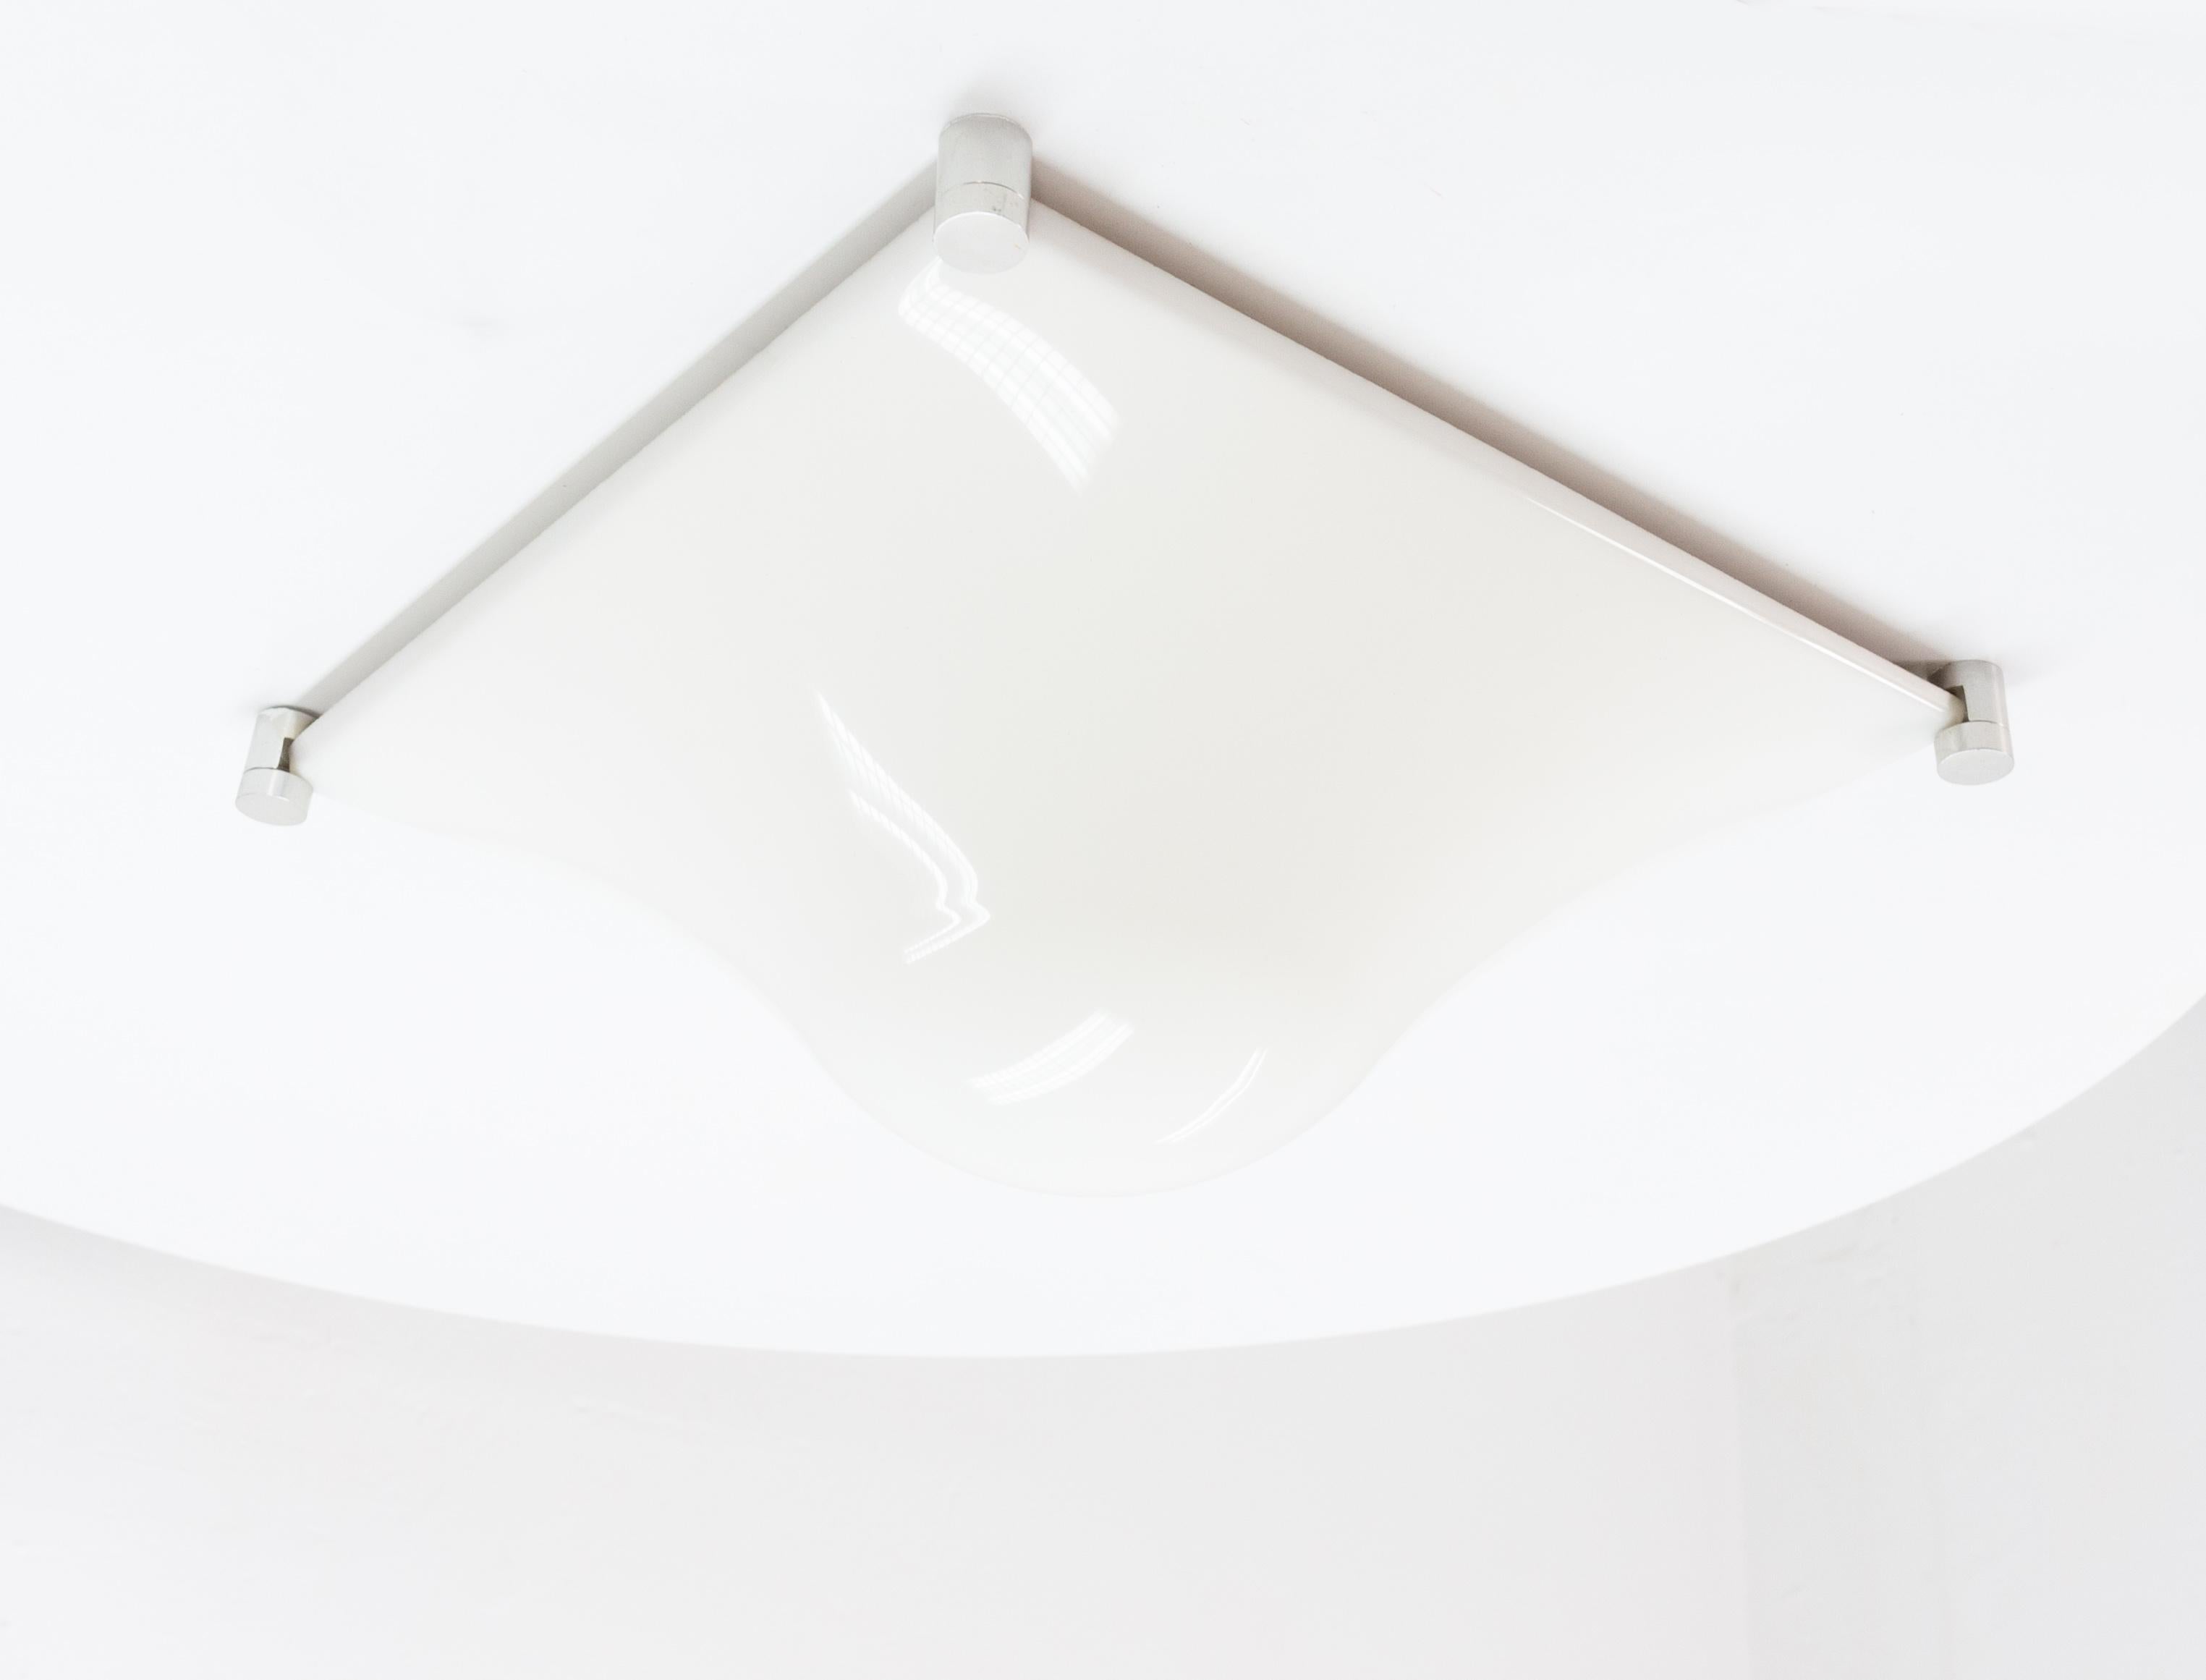 Bolla 50 ceiling light by Elio Martinelli for Martinelli Luce

Name: Bolla 50 ceiling light designer: Elio Martinelli manufacturer: Martinelli Luce, Italy
design year: 1960. Milky white plastic in the shape of a falling drop. also fantastic as a